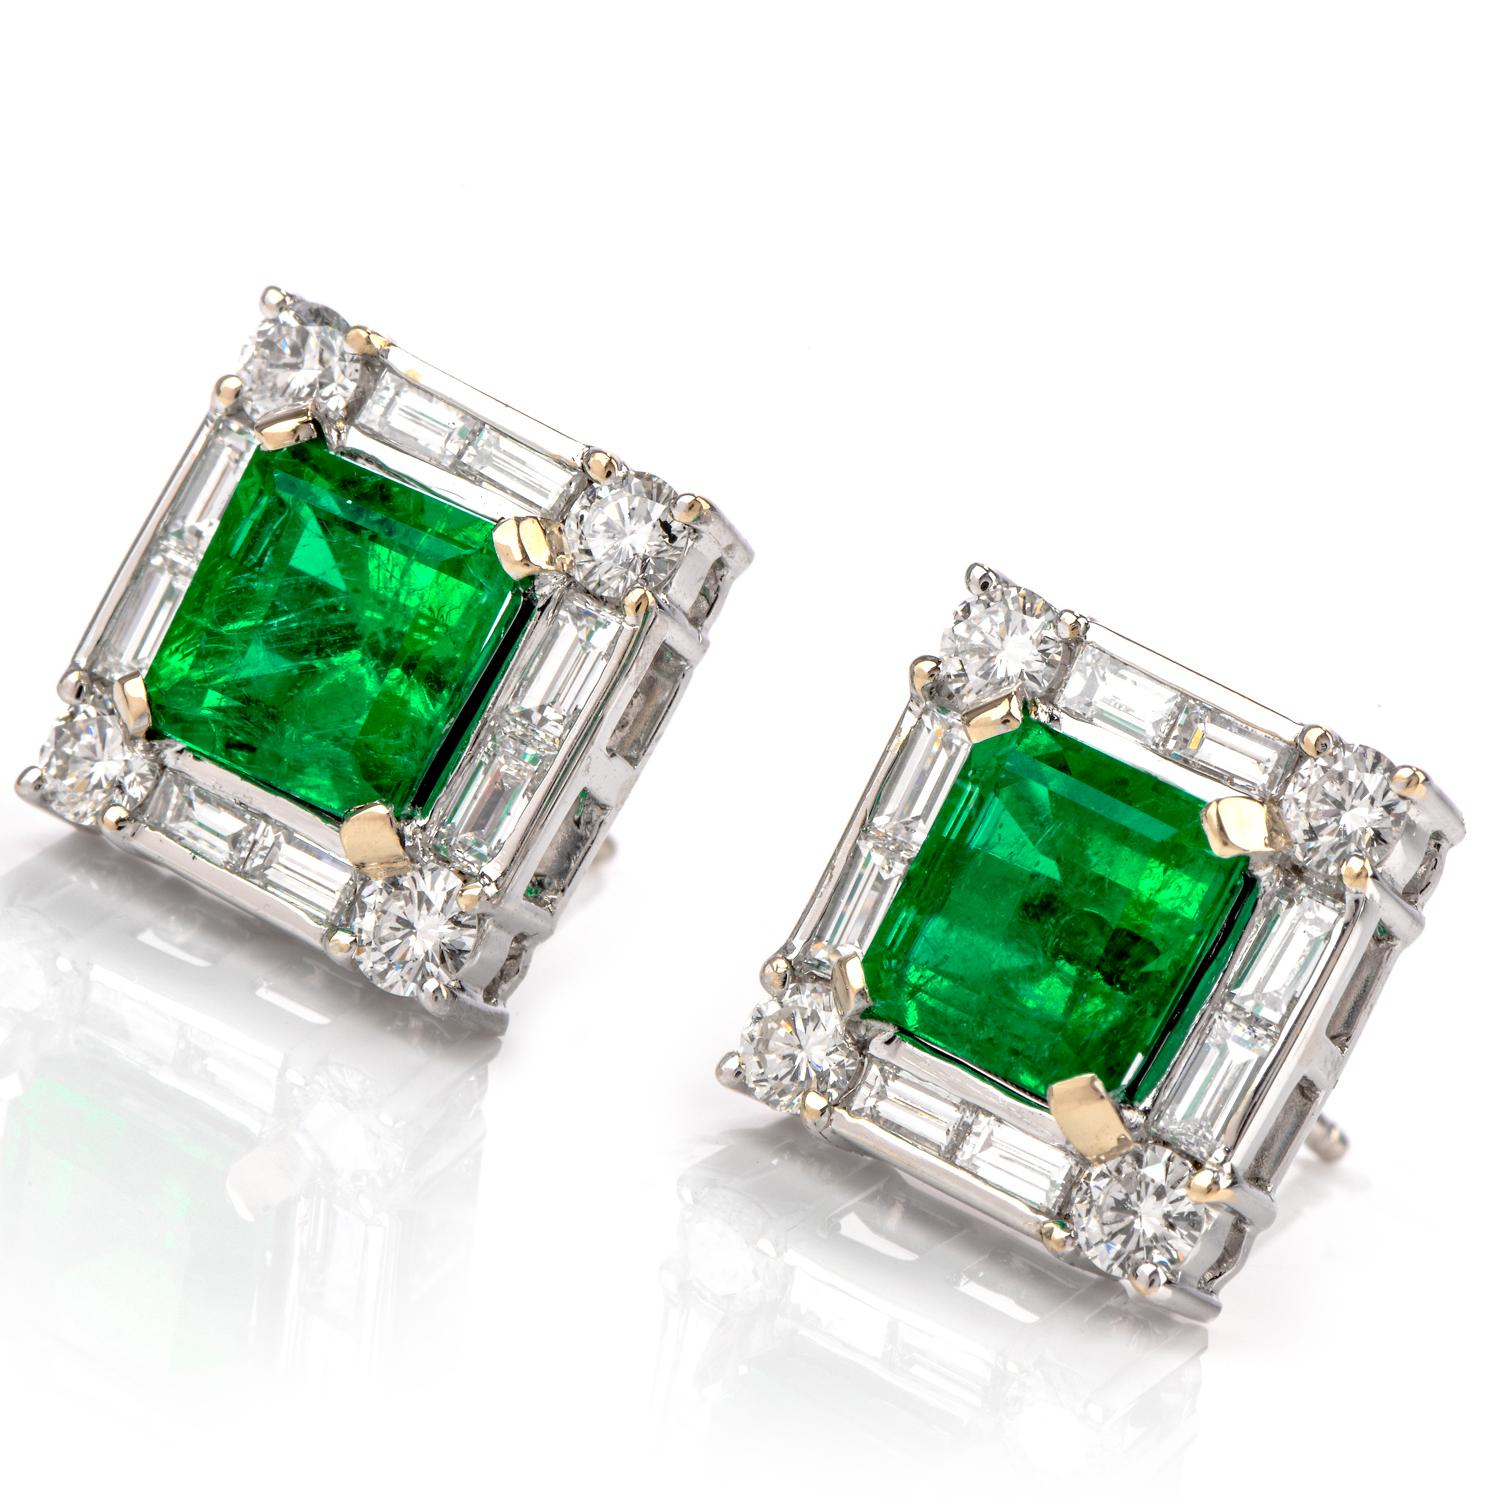 These opulent Diamond and GIA certified Genuine Colombian Emerald

These stunning stud earrings were crafted in 18K white gold. 

Featuring a vibrant green Natural Emerald in the center of each, the emeralds 

create a s stark contrast in color with